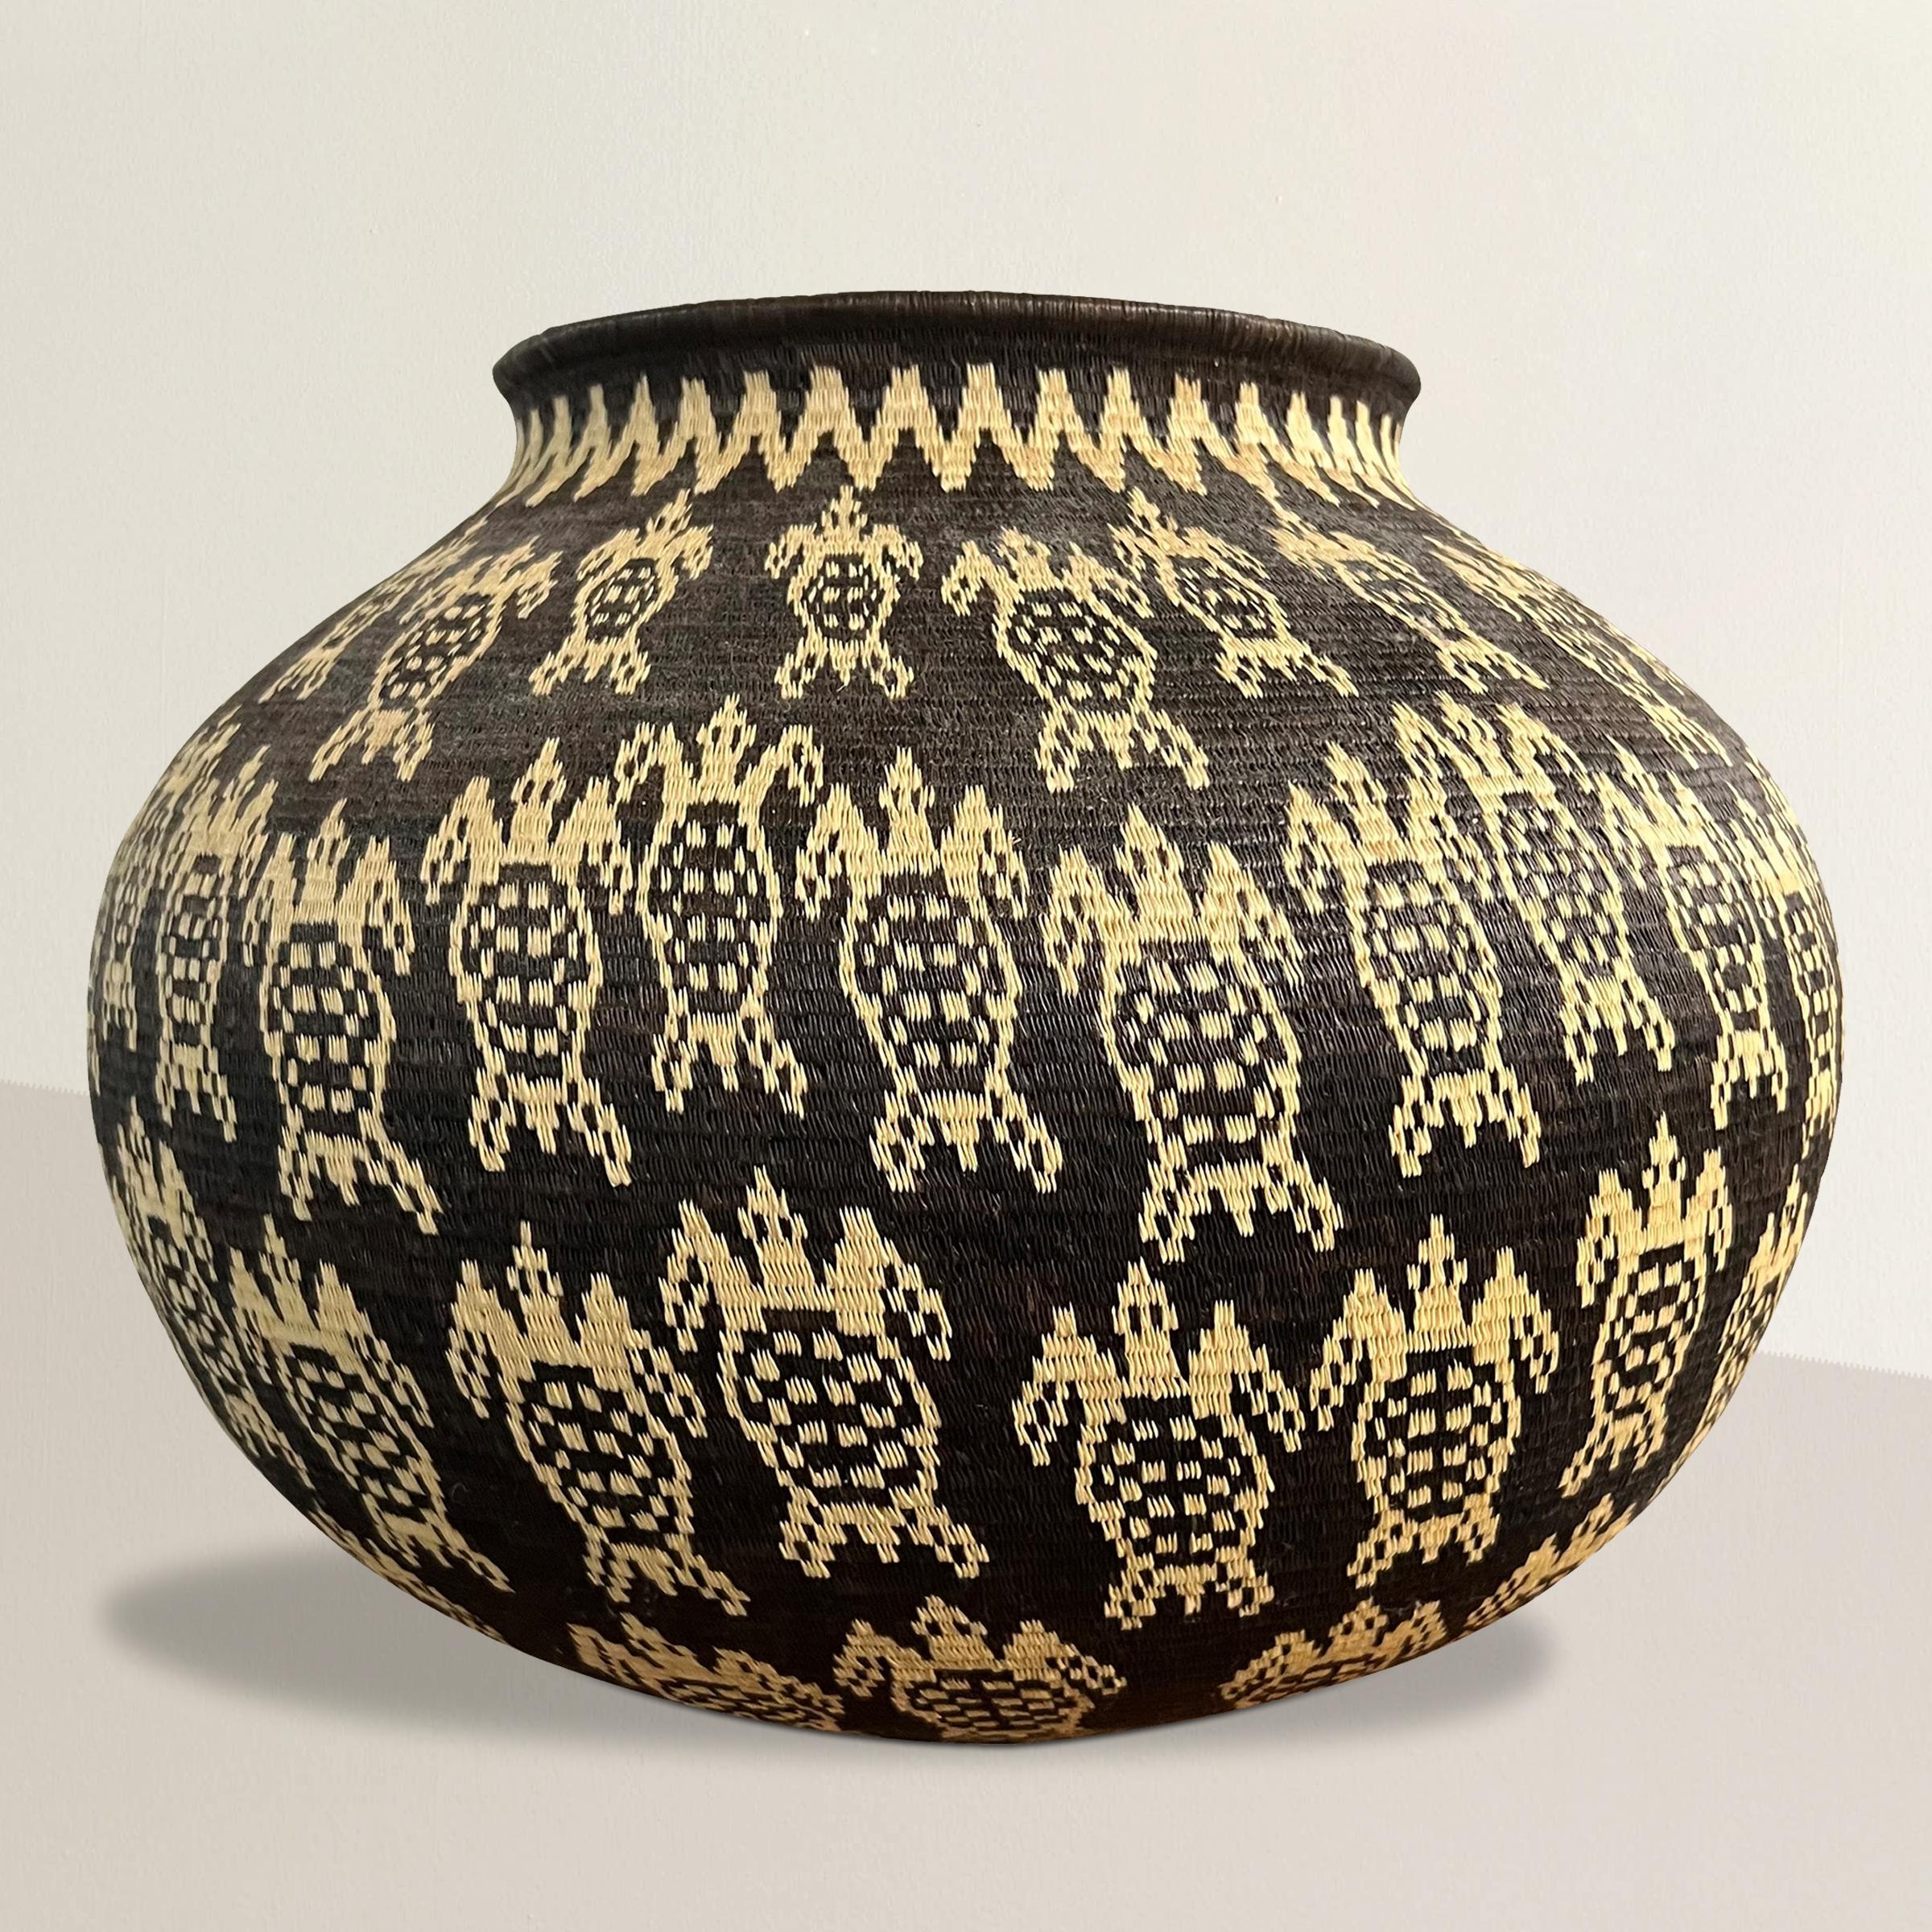 This 20th-century Emberá-Wounaan basket is a masterpiece of indigenous artistry, exemplifying the extraordinary craftsmanship of the Emberá-Wounaan people from Panama and Colombia. Woven with intricate skill, it features a captivating all-over sea